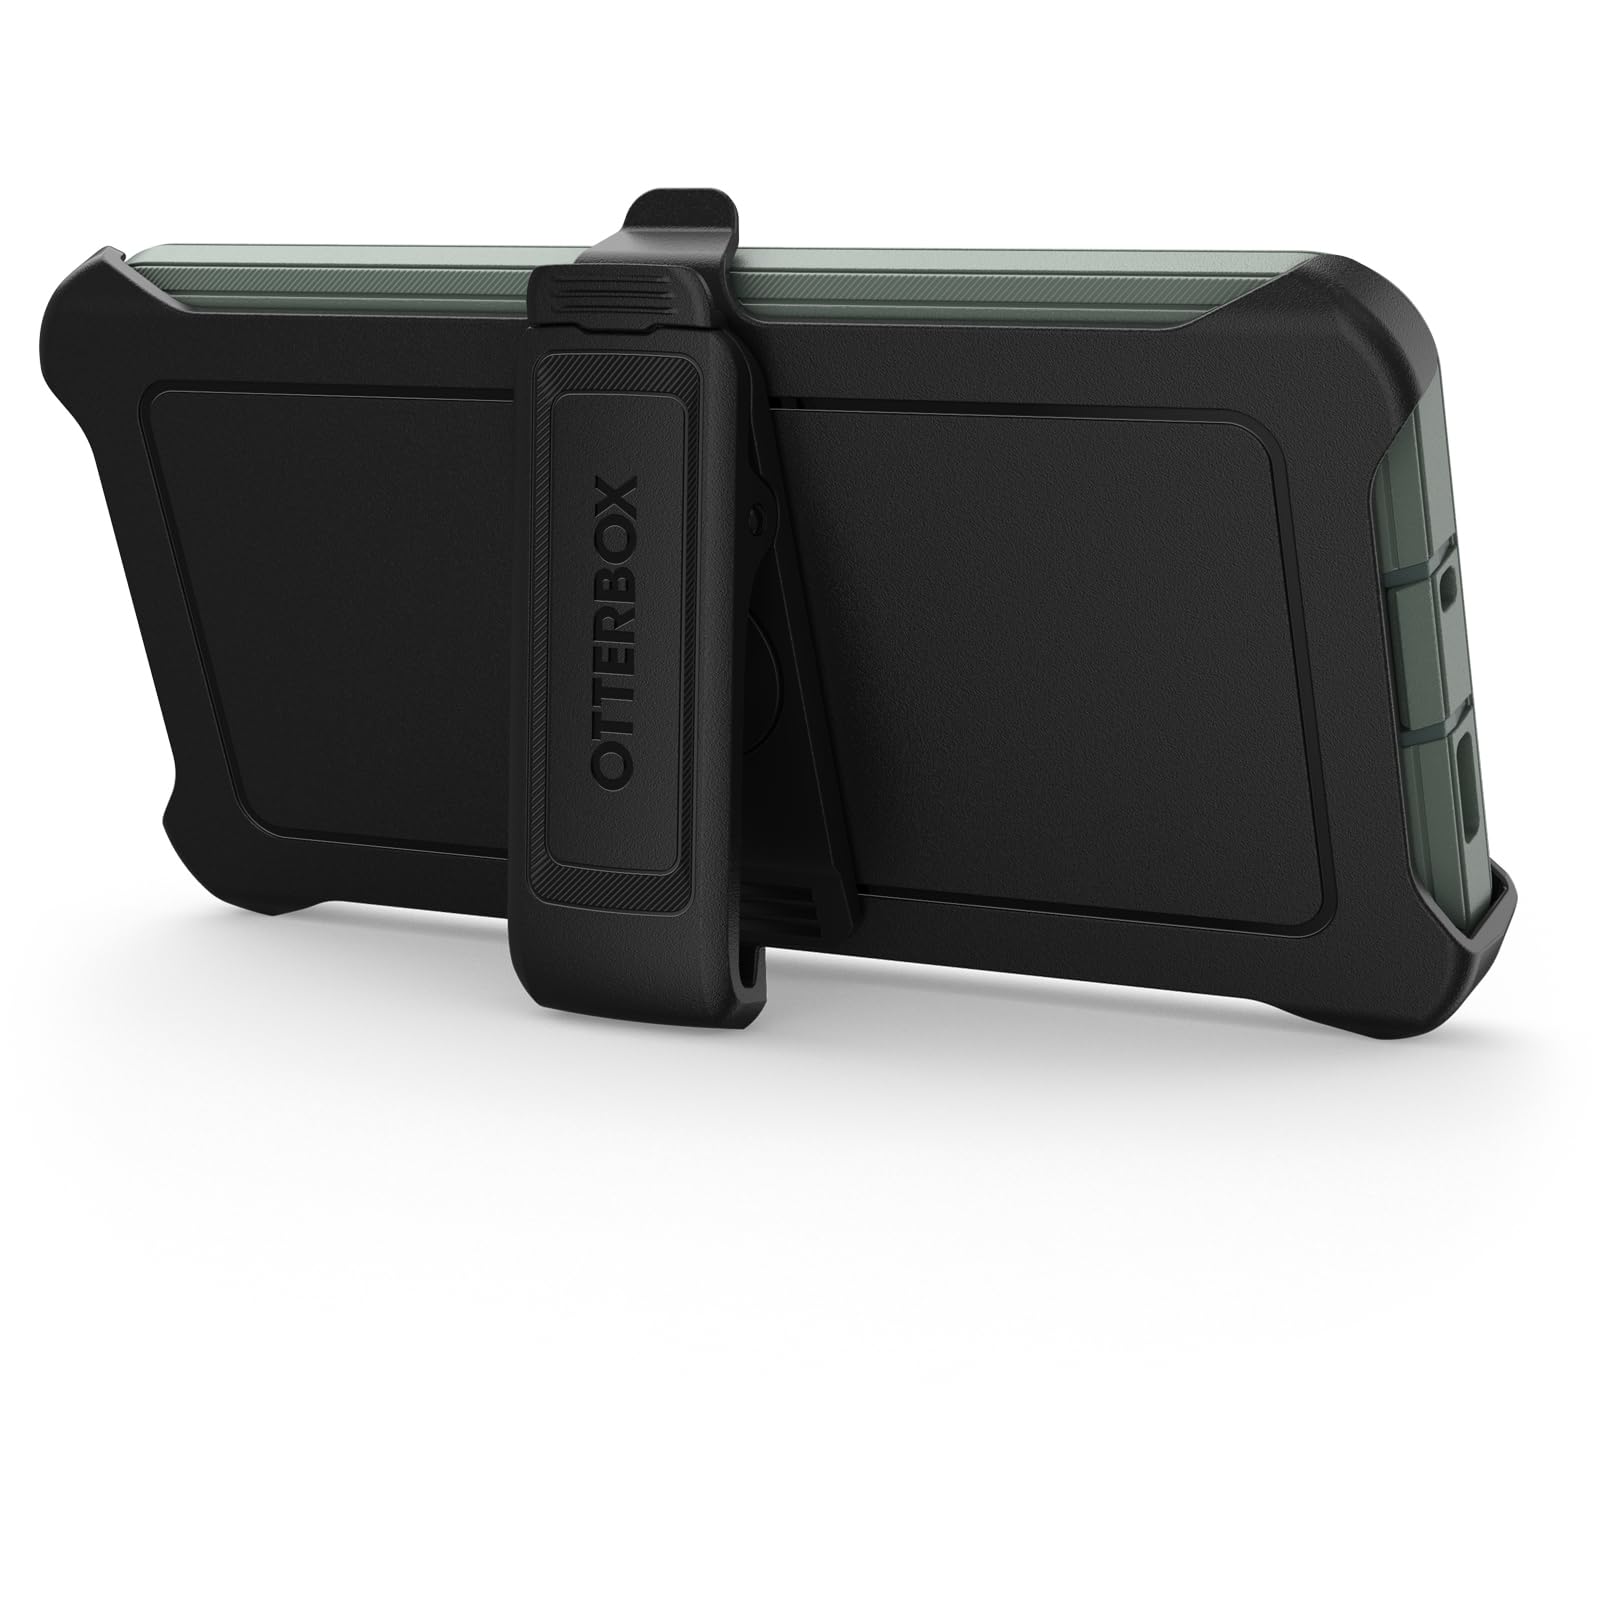 OtterBox Samsung Galaxy S24+ Defender Series Case - Forest Ranger (Green), Rugged & Durable, with Port Protection, Includes Holster Clip Kickstand